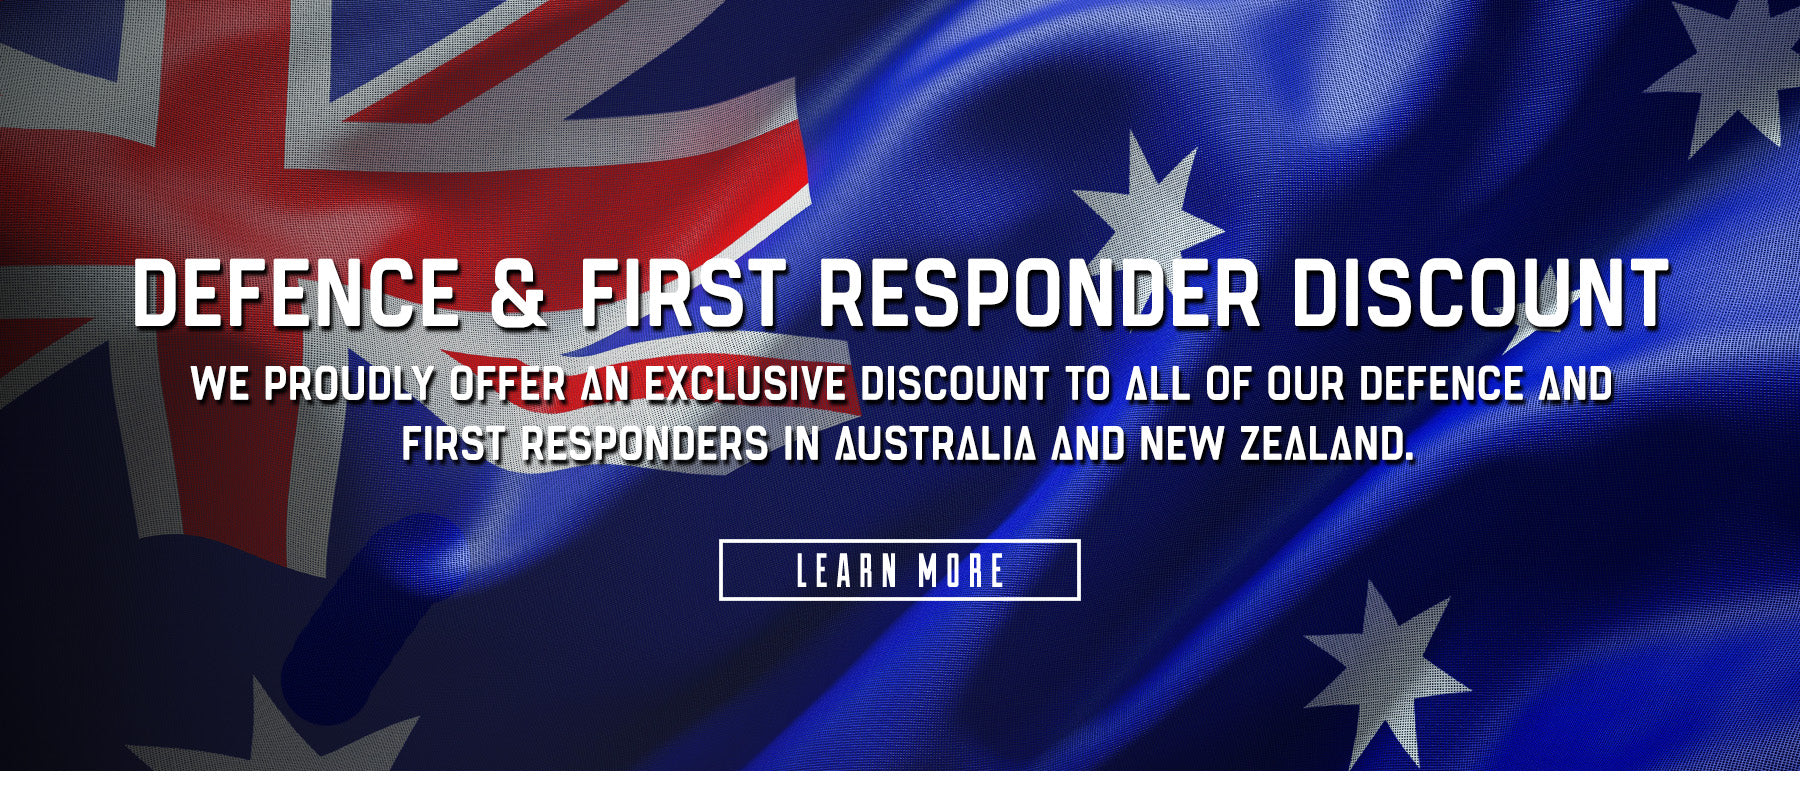 Heat Wave Visual Australia proudly offers our Defence and First Responders an exclusive discount for all eyewear.